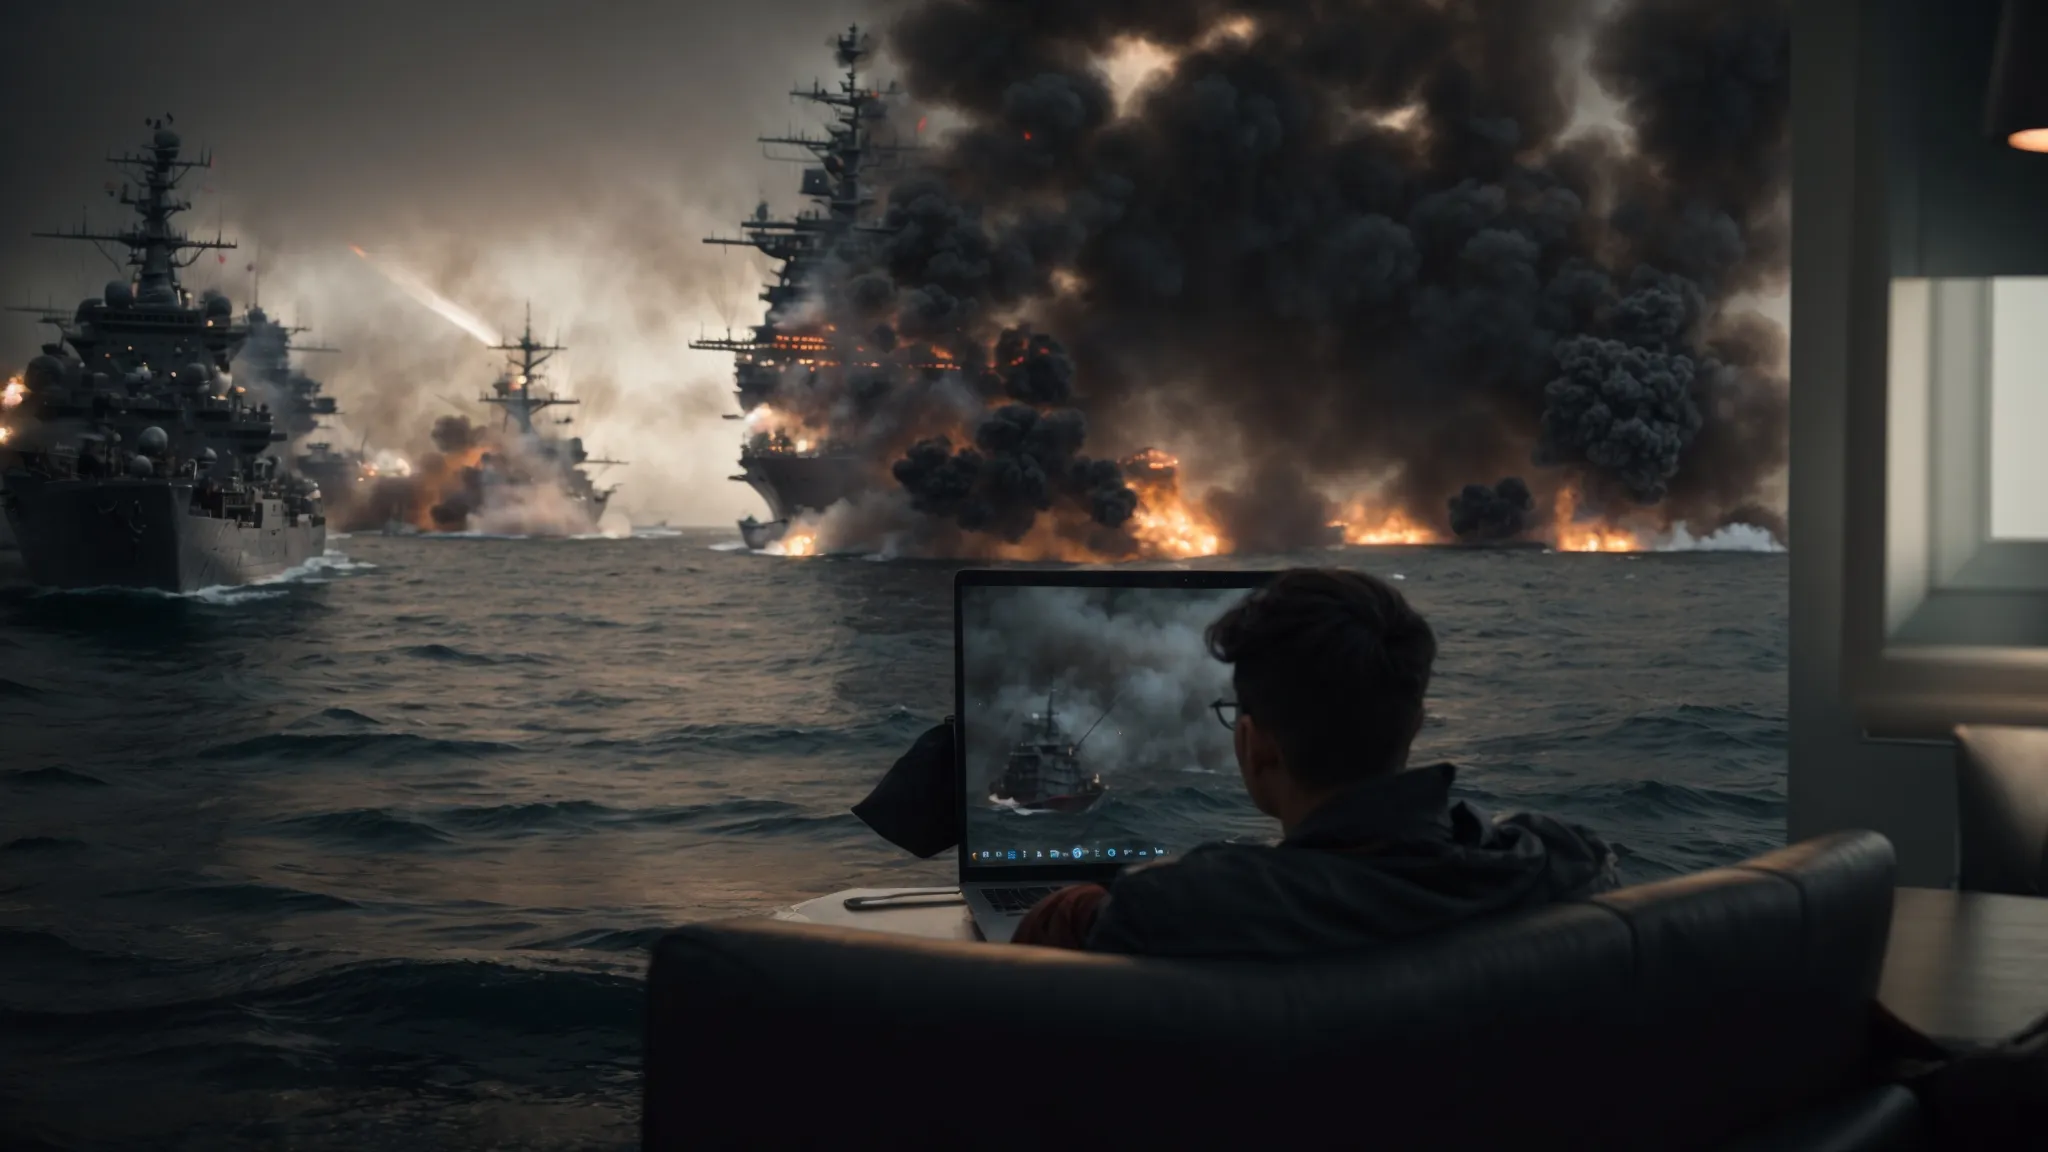 a person sitting on the couch, looking intently at a thrilling naval battle scene playing on their laptop screen.